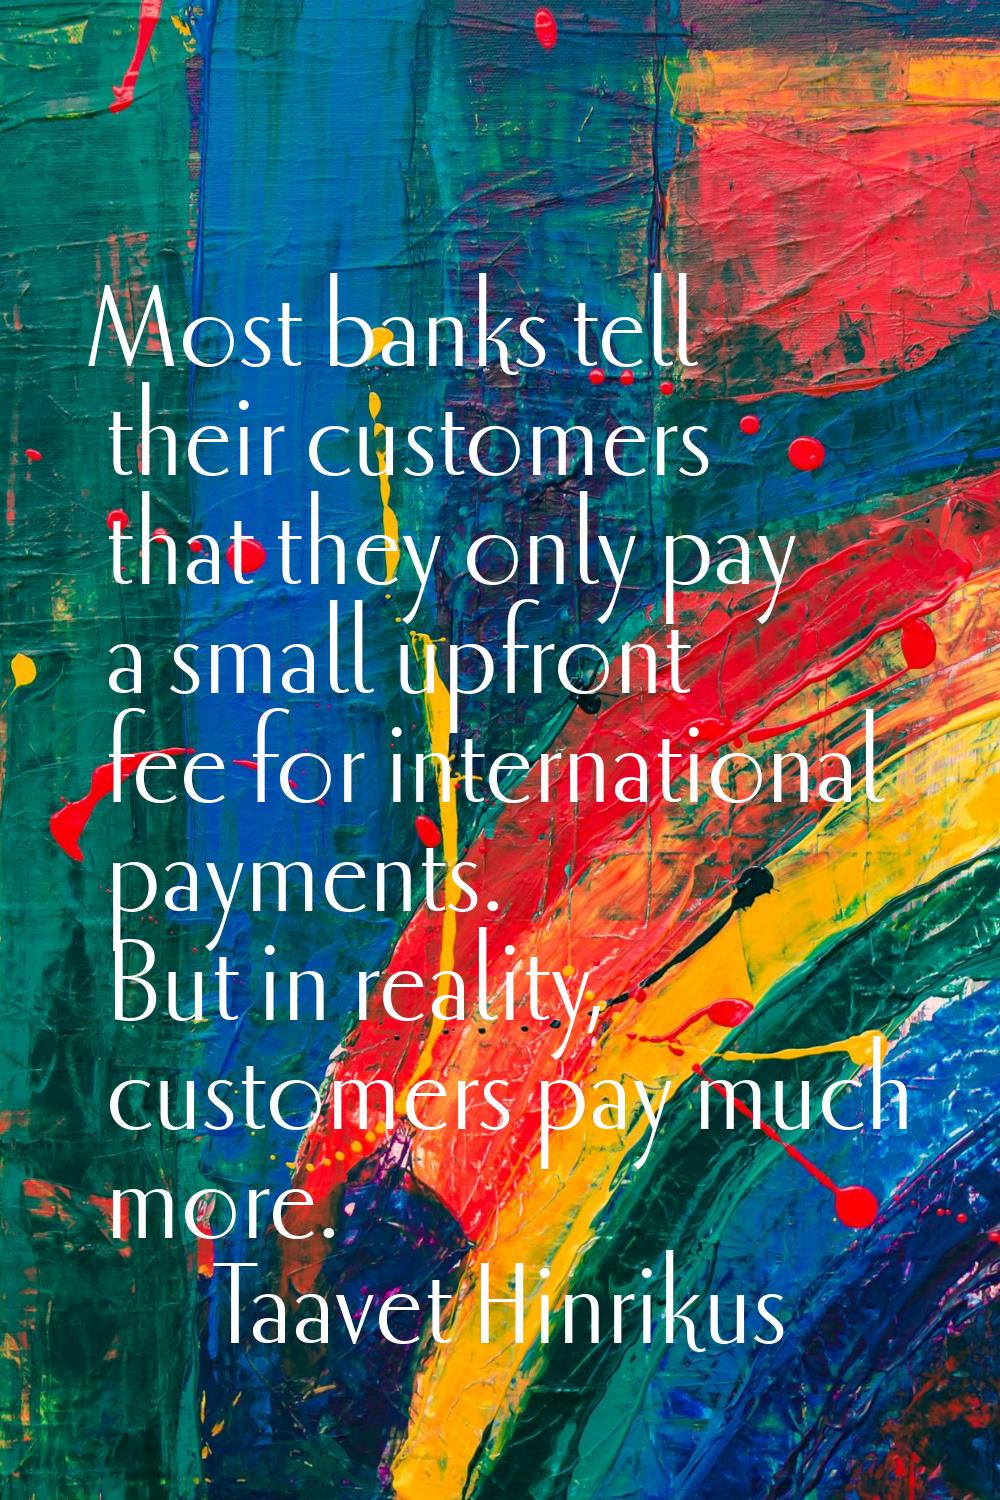 Most banks tell their customers that they only pay a small upfront fee for international payments. 